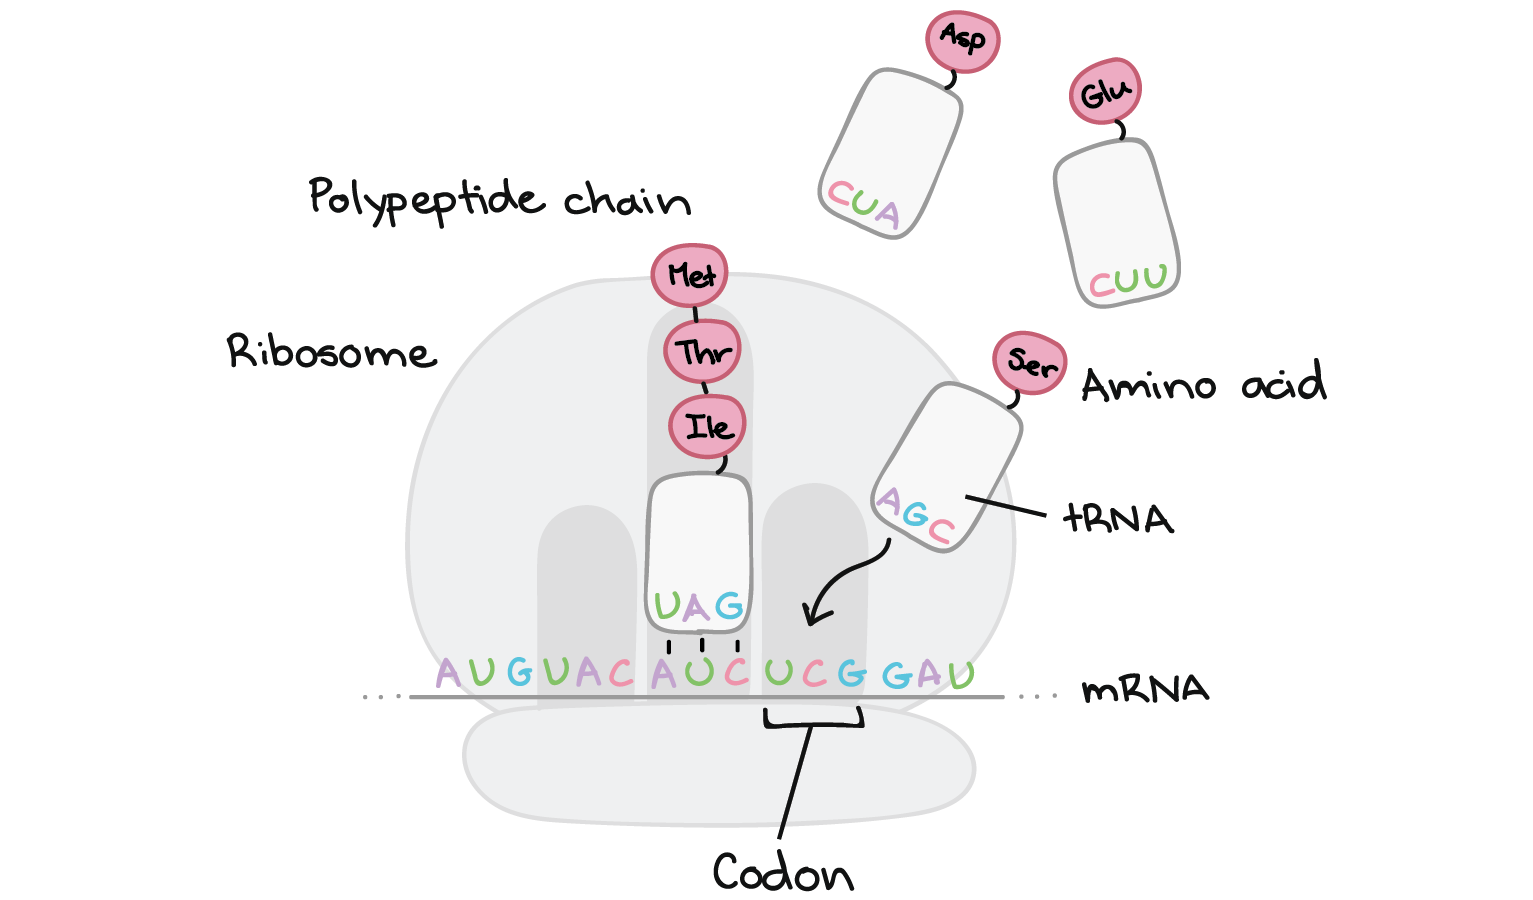 Translation occurring in a ribosome. The mRNA is bound to the ribosome, where it can interact with tRNA molecule.

In this image, the mRNA has a sequence of:

3'-...AUG UAC AUC UCG GAU...-5'

A tRNA bound to the third codon (5'-AUC-3') has a complementary sequence of 3'-UAG-5'. It bears a chain of polypeptides consisting of methionine and isoleucine, which is attached to the tRNA by the isoleucine. To the right of this tRNA, another tRNA is binding to the next codon (5'-UCG-3'). This tRNA again has a complementary sequence of nucleotides (3'-AGC-5') and bears the amino acid serine, which is the amino acid specified by the mRNA codon. The serine carried by this tRNA will be added to the growing polypeptide chain.

Other tRNAs carrying other amino acids are floating around in the background. One carries Glu (glutamic acid) and has a sequence of nucleotides at its end that reads 3'-CUU-5'. The other carries Asp (aspartic acid) and has a sequence of nucleotides at its end that reads 3'-CUA-5'.